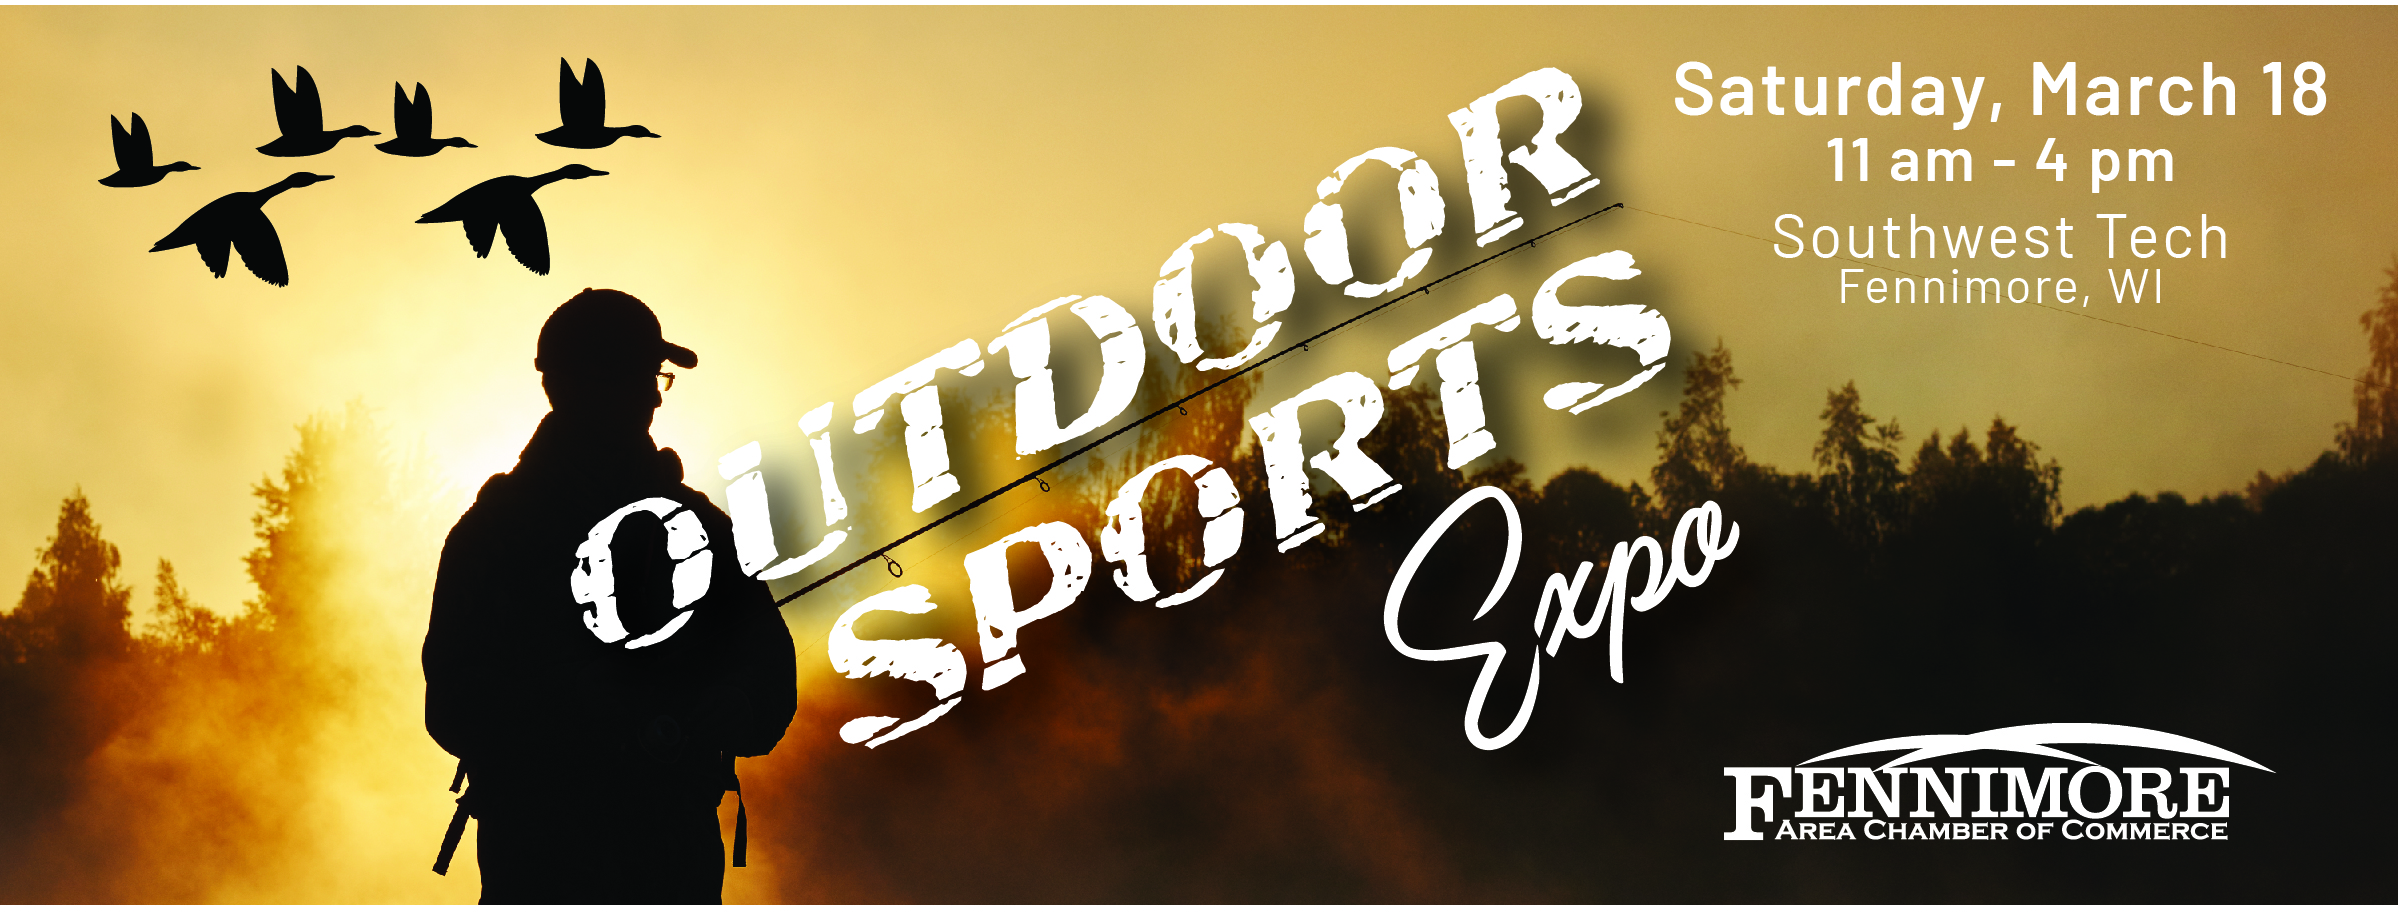 Outdoor Sports Expo hosted by the Fennimore Area Chamber of Commerce at Southwest Tech